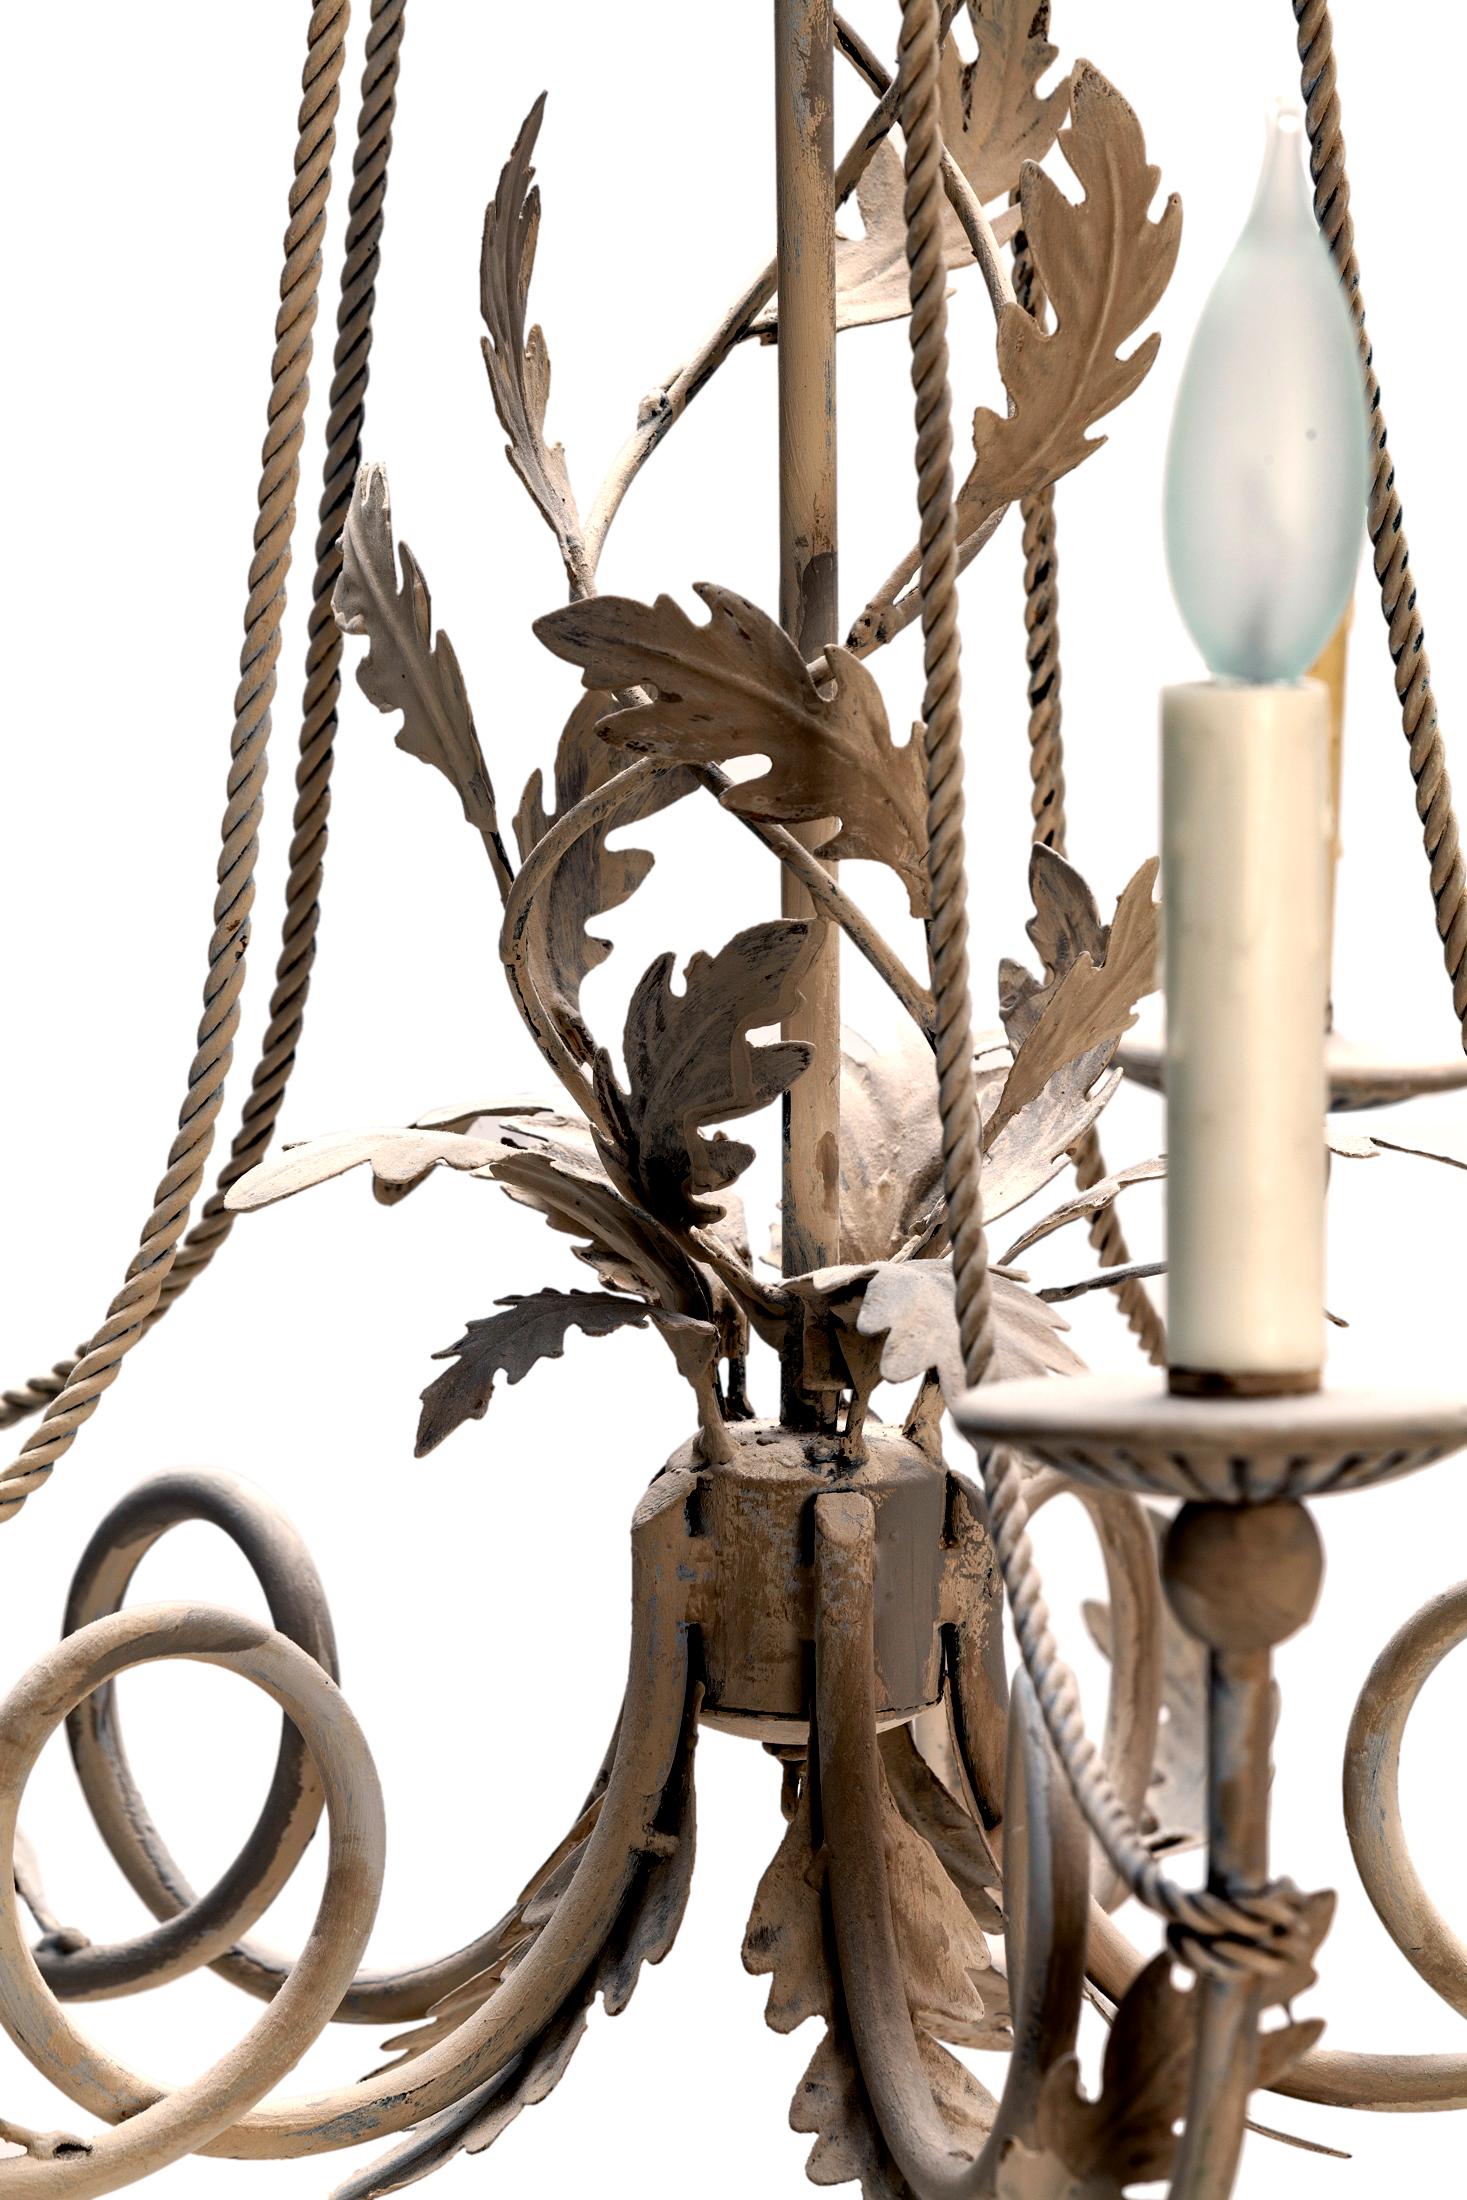 Hand-painted five arm chandelier w central oak leaf spiral.
Twisted rope accent lead to each arm.
Wood candle cups with natural wax candle covers.
